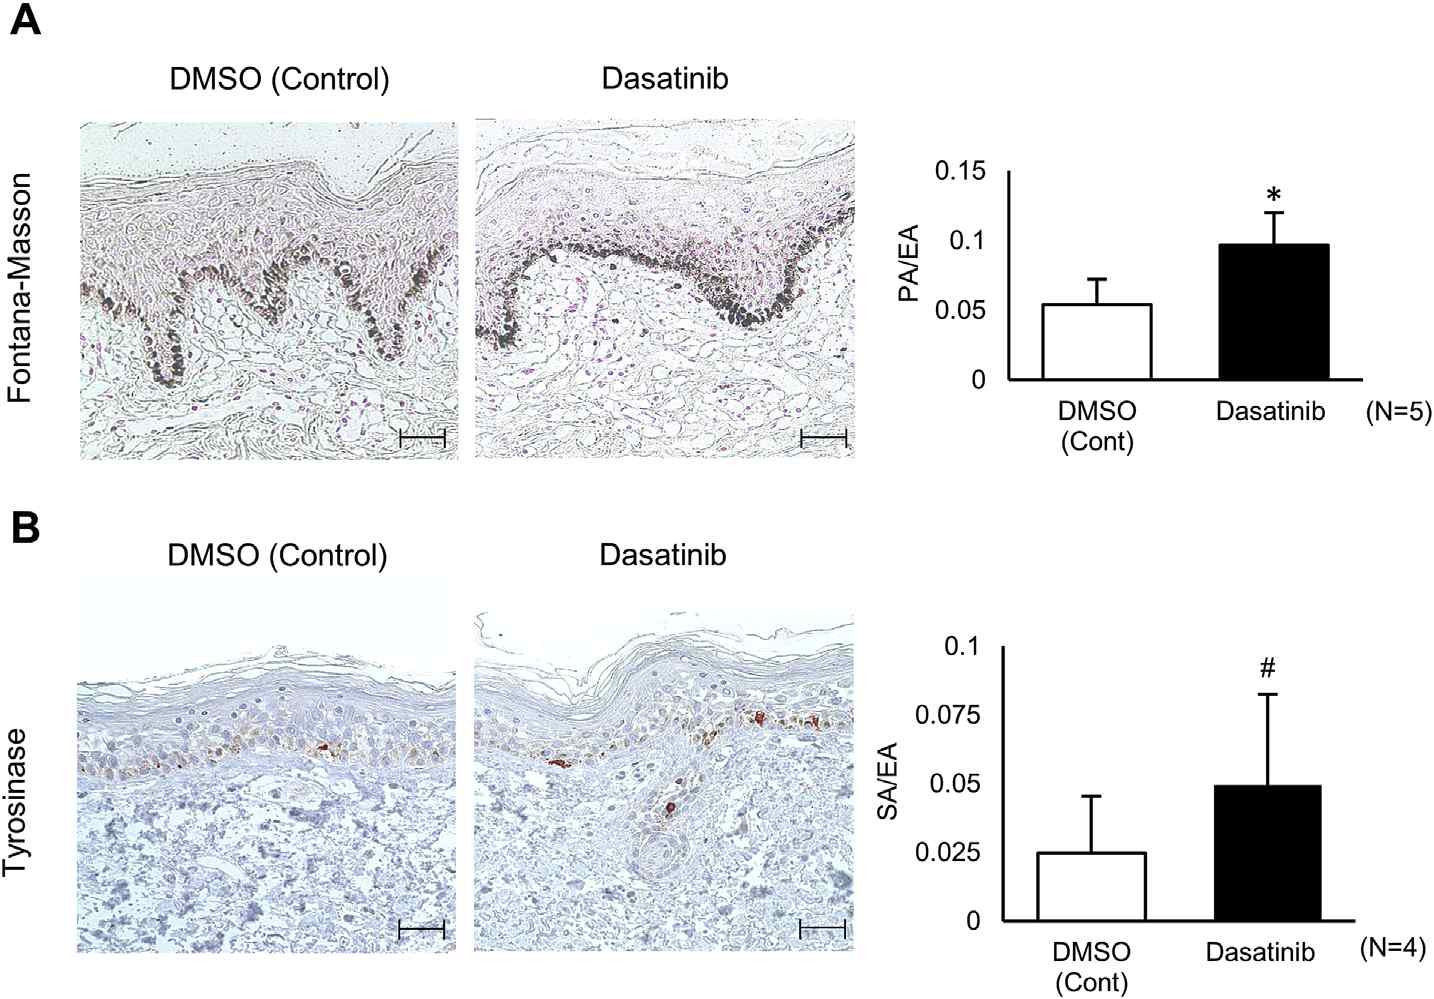 Dasatinib induces cutaneous pigmentation. (A) Pigmentation of ex vivo human skin was visualized by Fontana-Masson staining. The pigmented area/epidermal area (PA/EA) ratio was measured by an image analysis (scale bar, 100 mm). (B) The tyrosinase expression level was detected by immunohistochemical staining. The stained area/epidermal area (SA/EA) ratio was measured (scale bar, 100 mm). Data are presented as the mean ± SD (*p < 0.01 vs. control, #p < 0.05 vs. control)